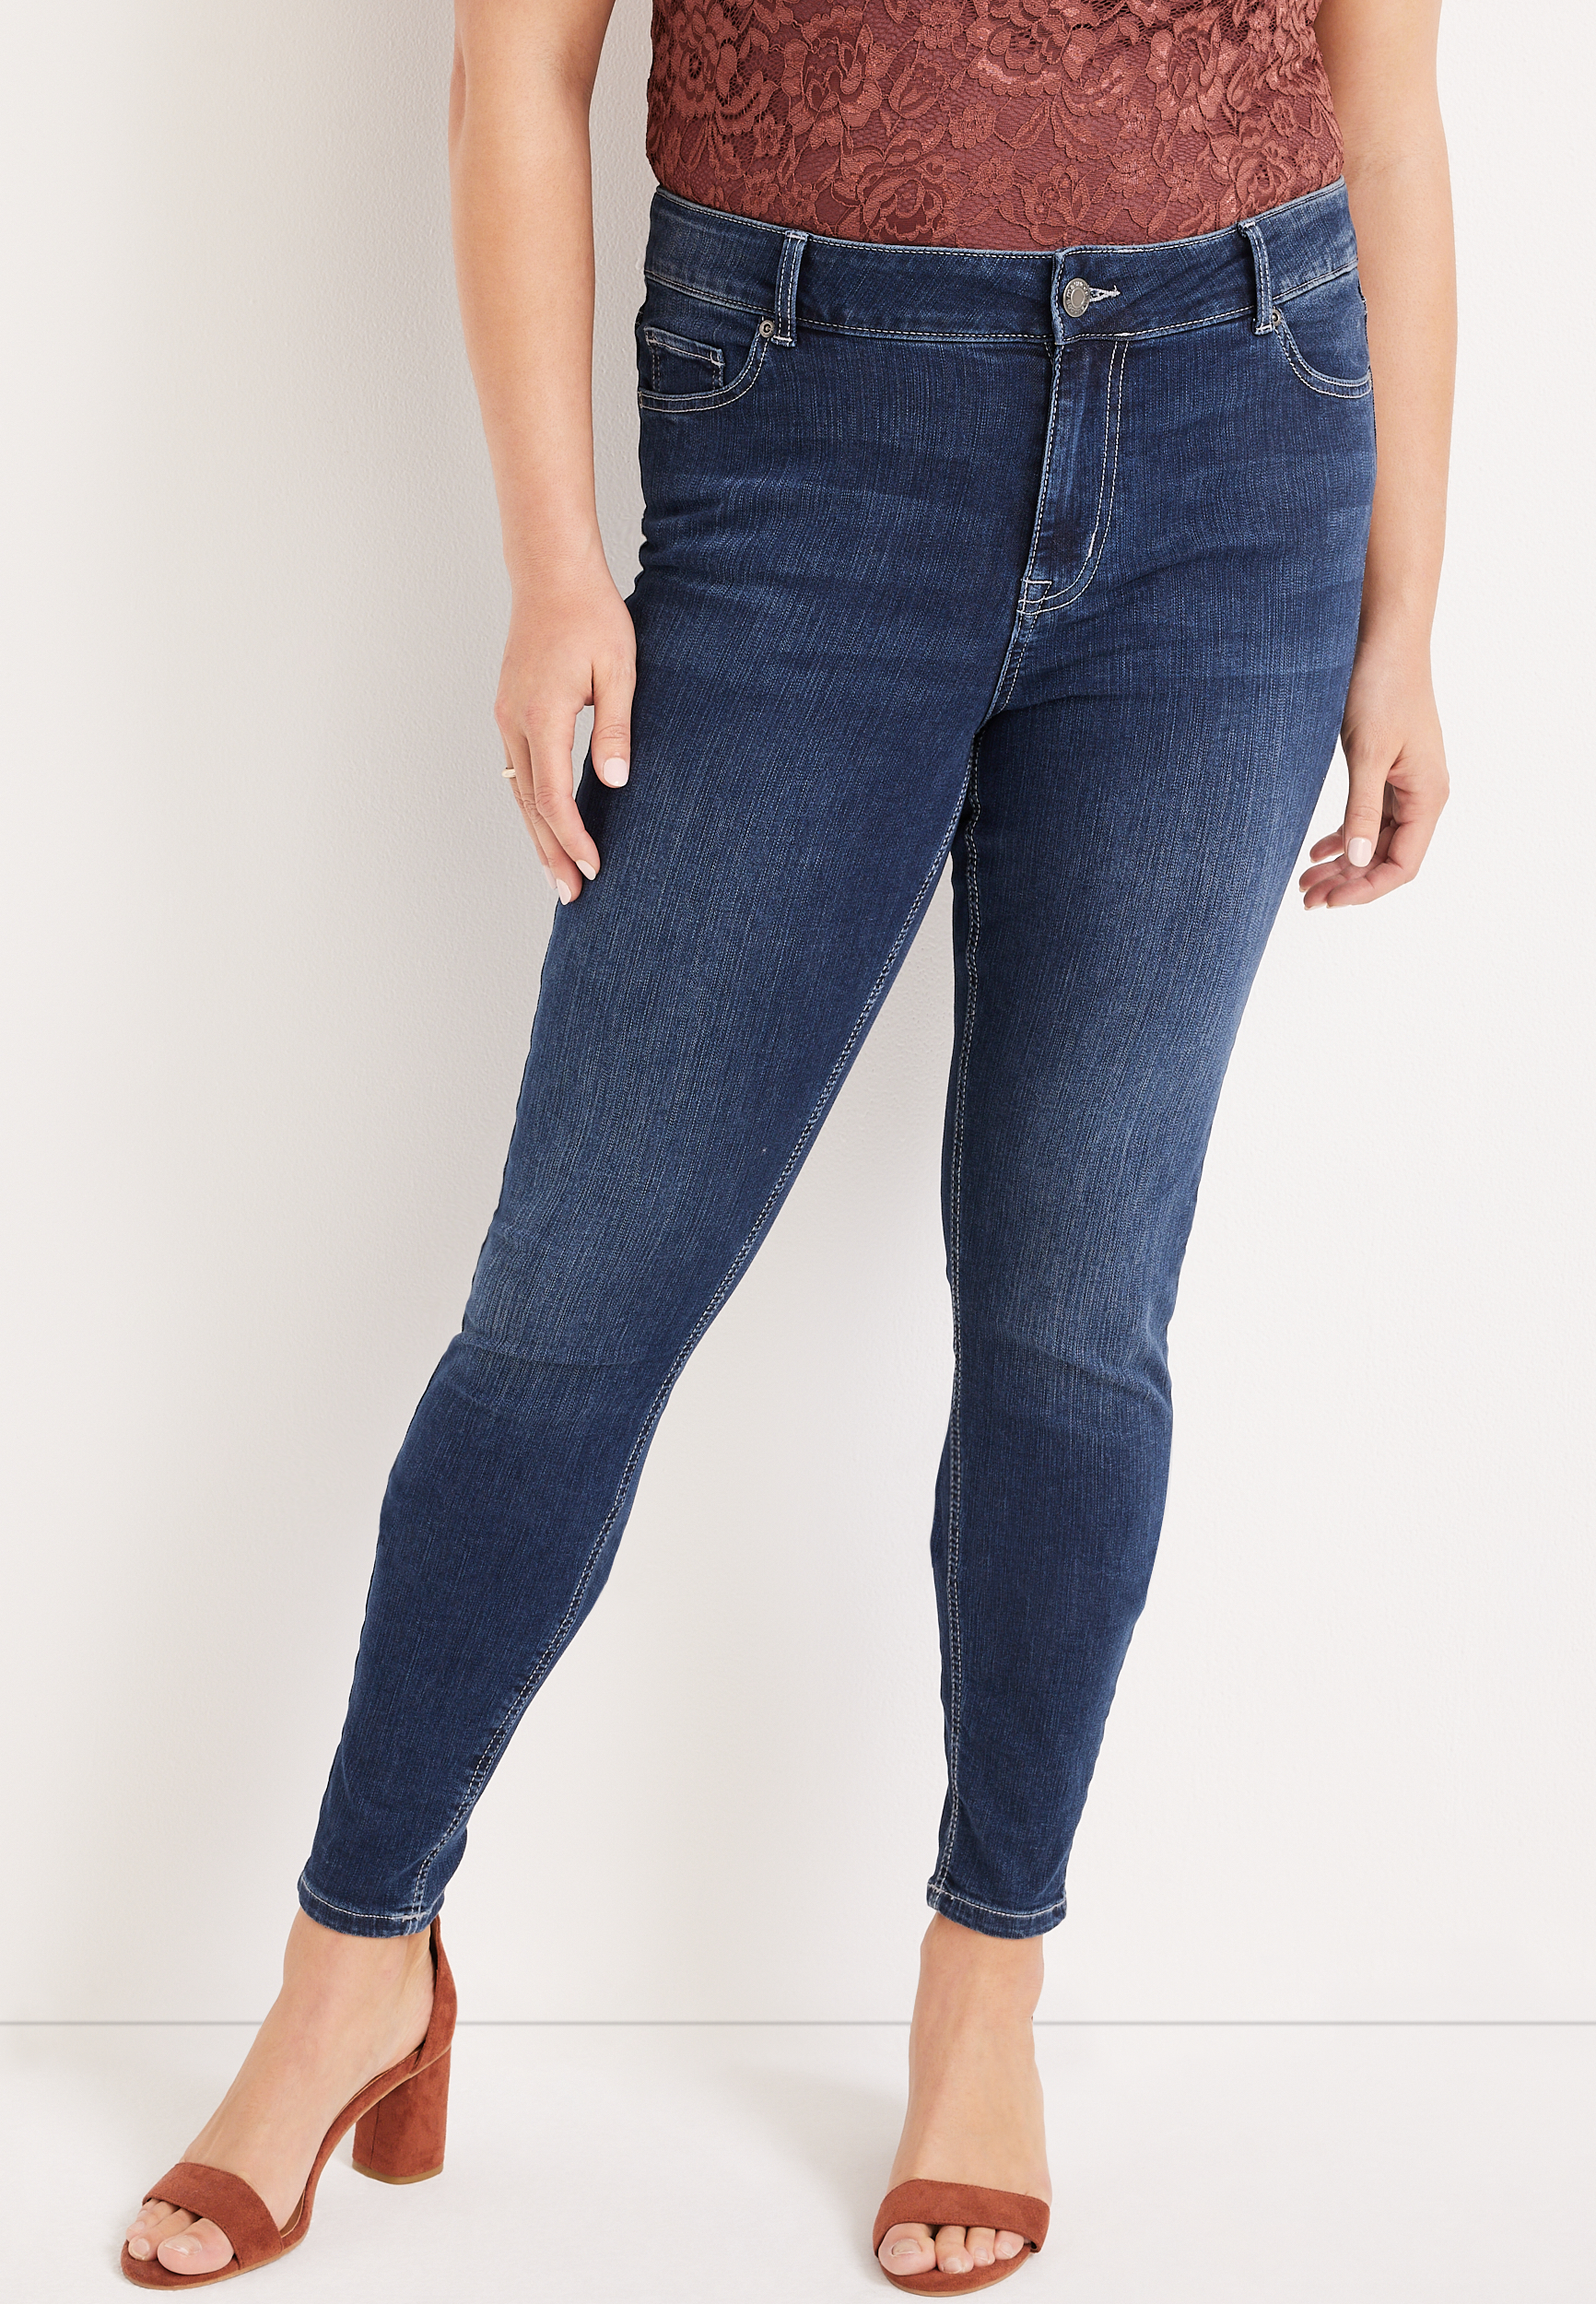 Plus Size m jeans by maurices™ Classic Skinny Mid Fit Mid Jean | maurices